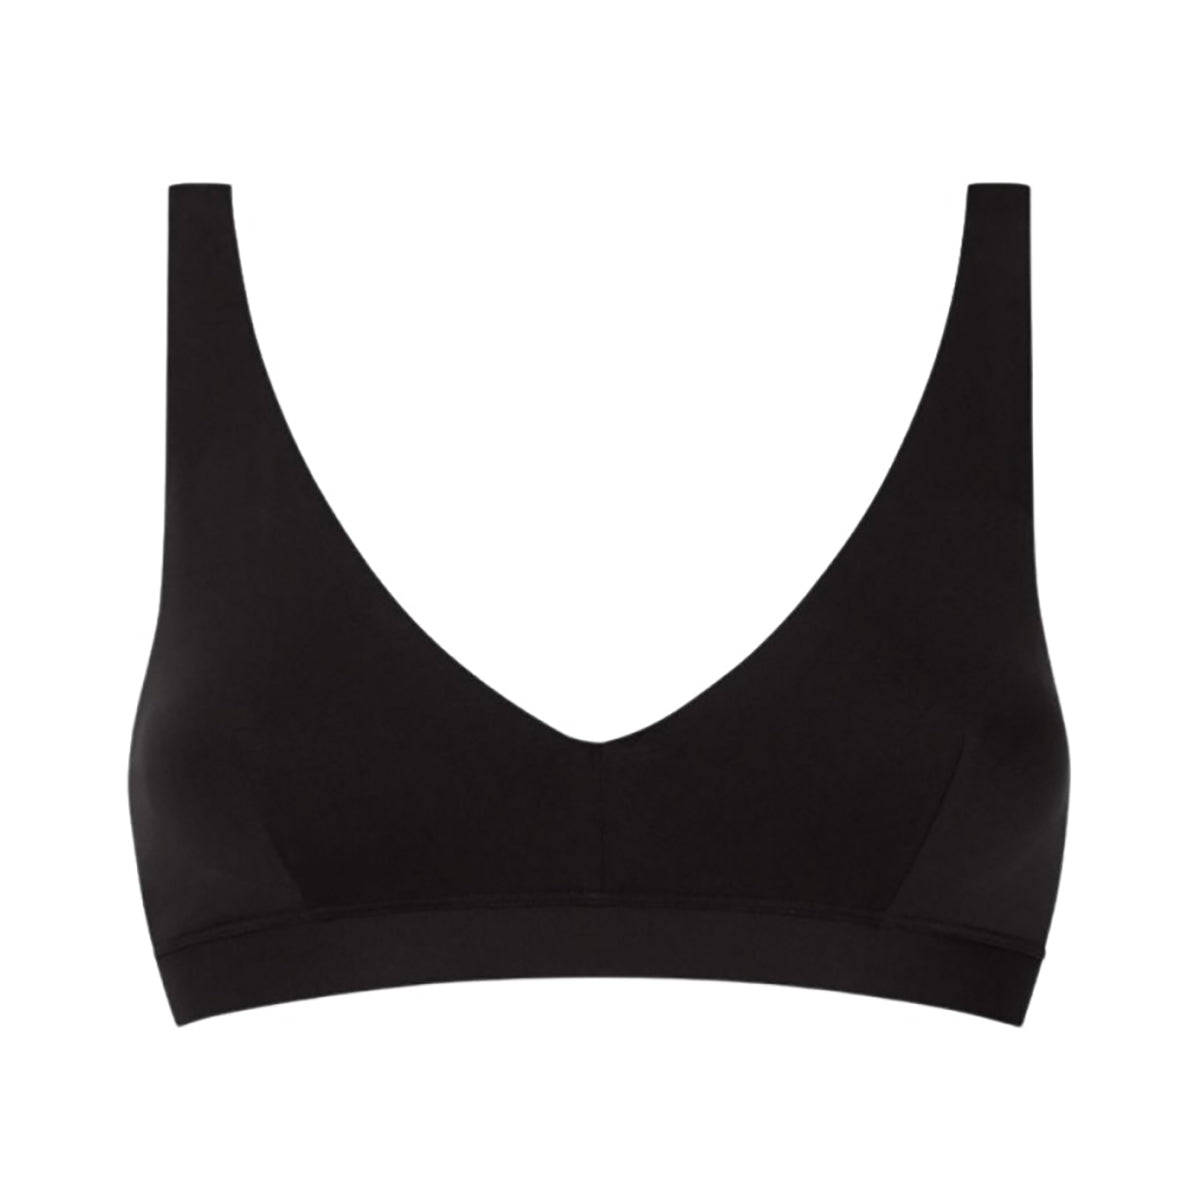 EHQJNJ Bralettes for Women Going Out Women's Comfortable and Traceless Ice  Silk Top Brace with Less Steel Rims and Adjustable Bra Underwire Bikini Top  Bra Size Black Bralette Padded 